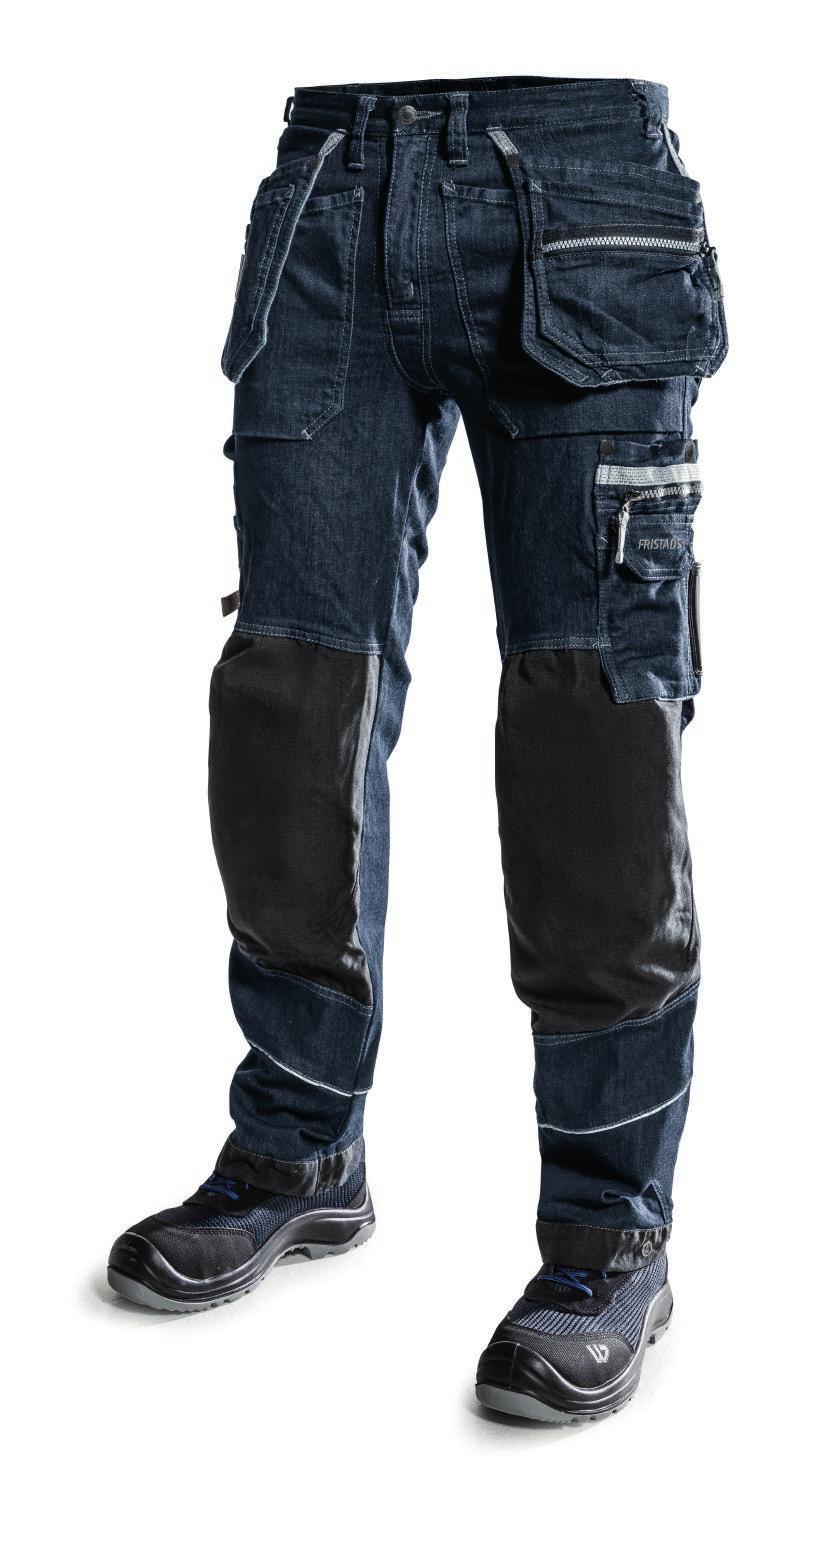 FULL STRETCH DENIM TROUSERS WITH HIGH DURABILITY 2 CORDURA reinforced back pockets, one with flap and velcro fastening Pockets reinforced with metal rivets at stress points Hammer loop Loose-hanging